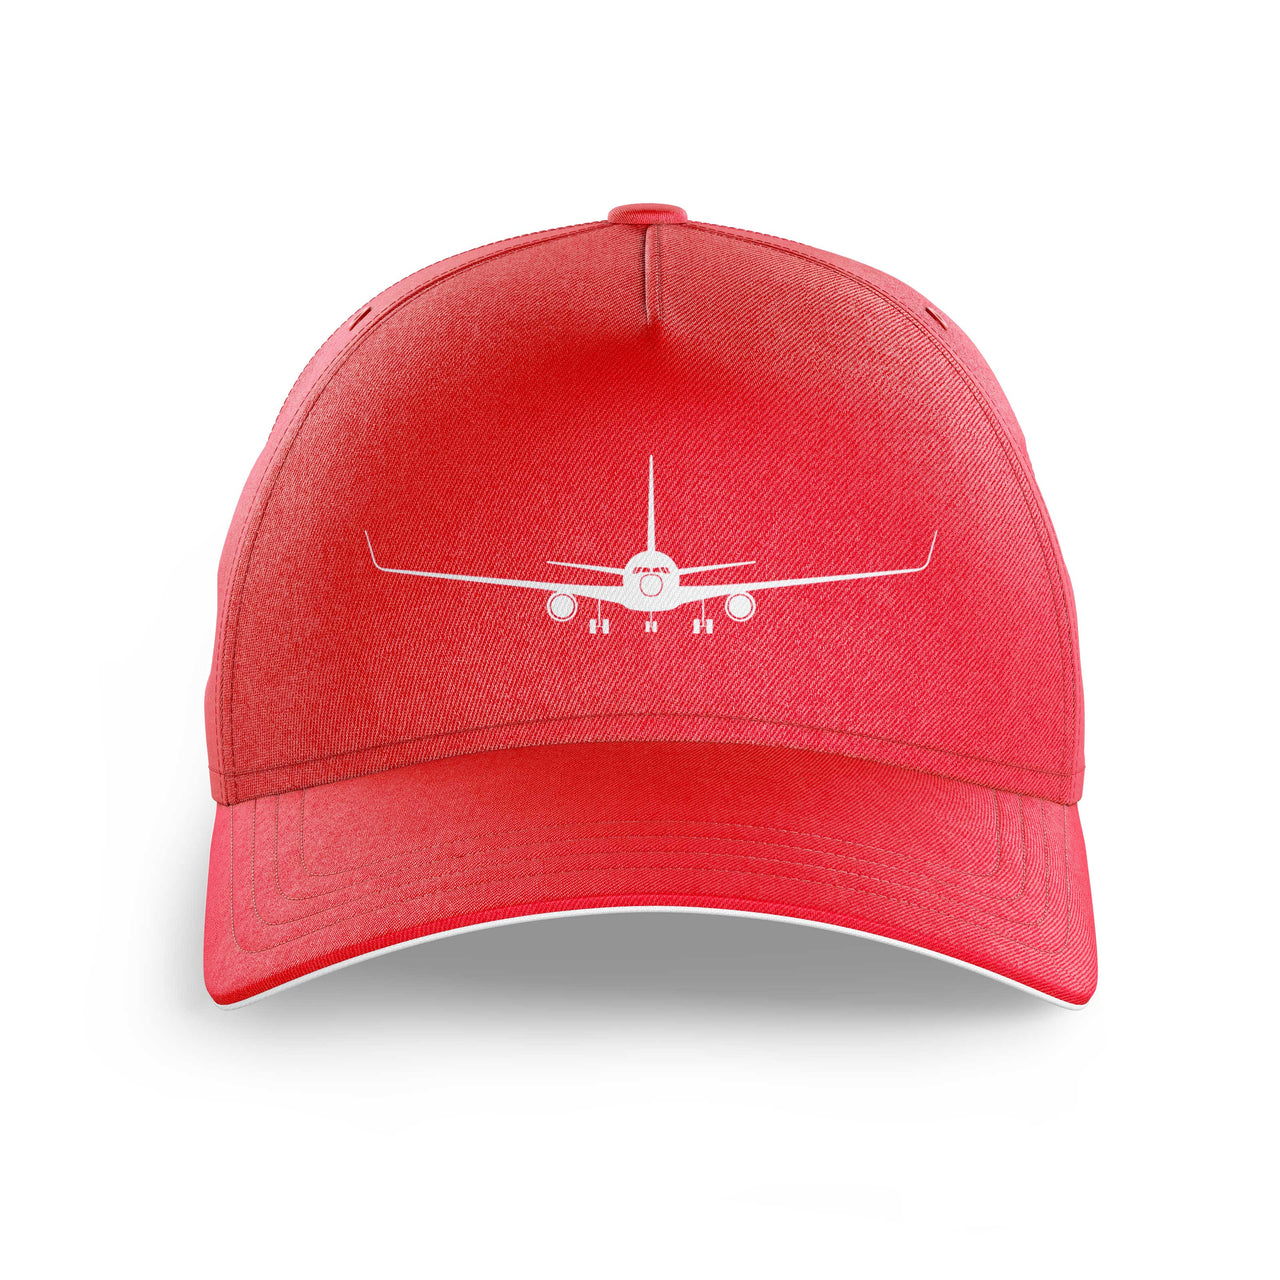 Boeing 767 Silhouette Printed Hats